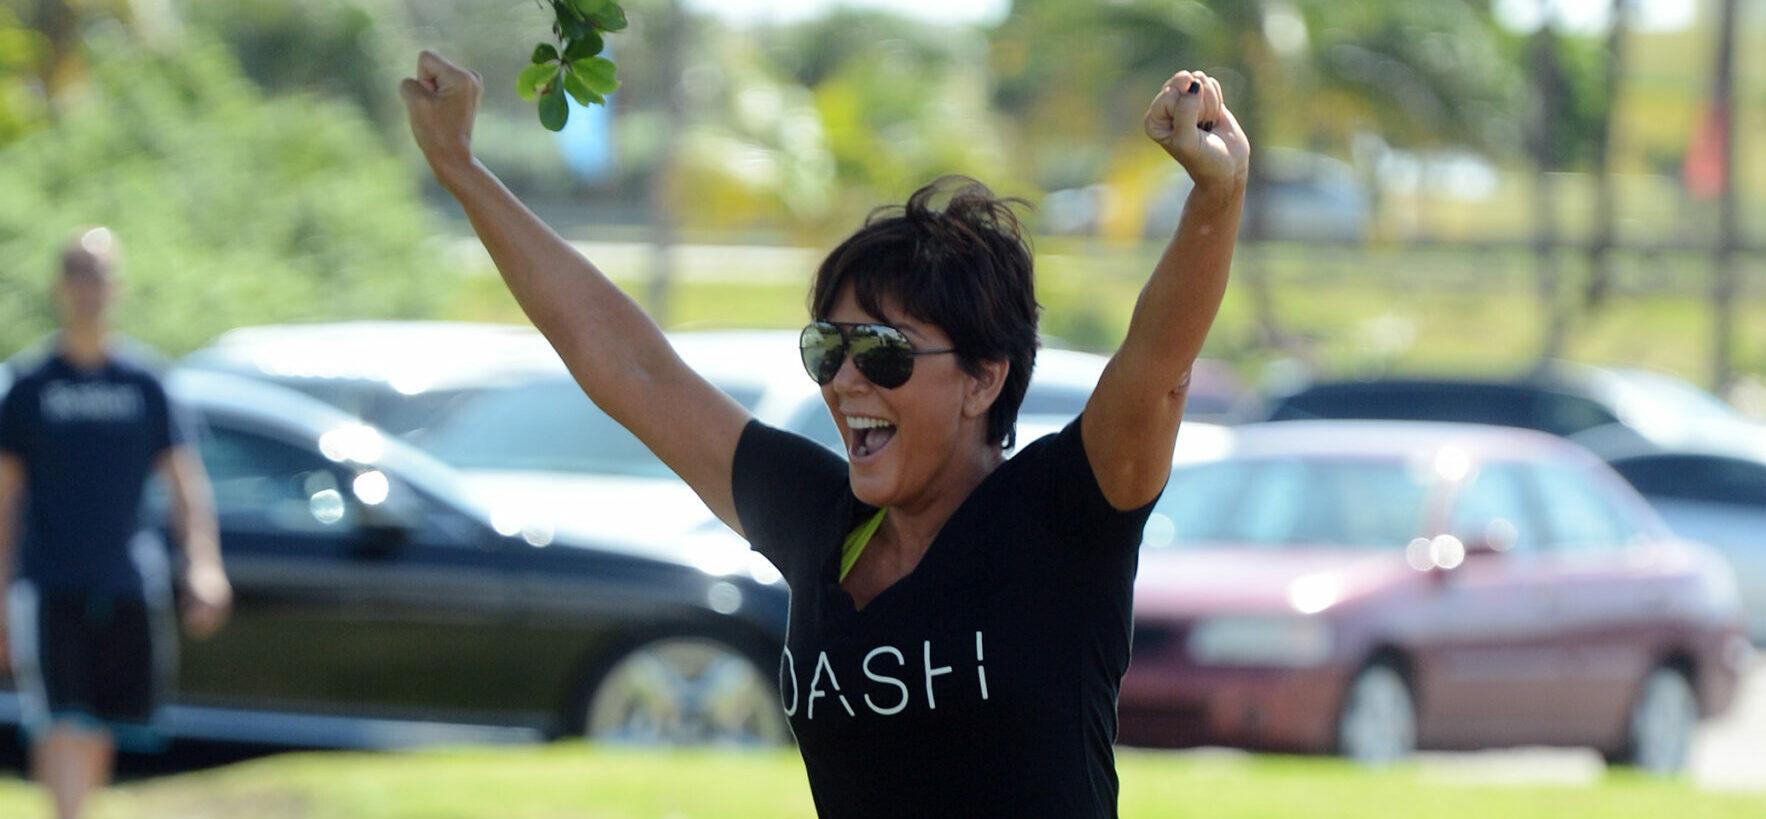 Kris Jenner celebrating with her hands up in the air